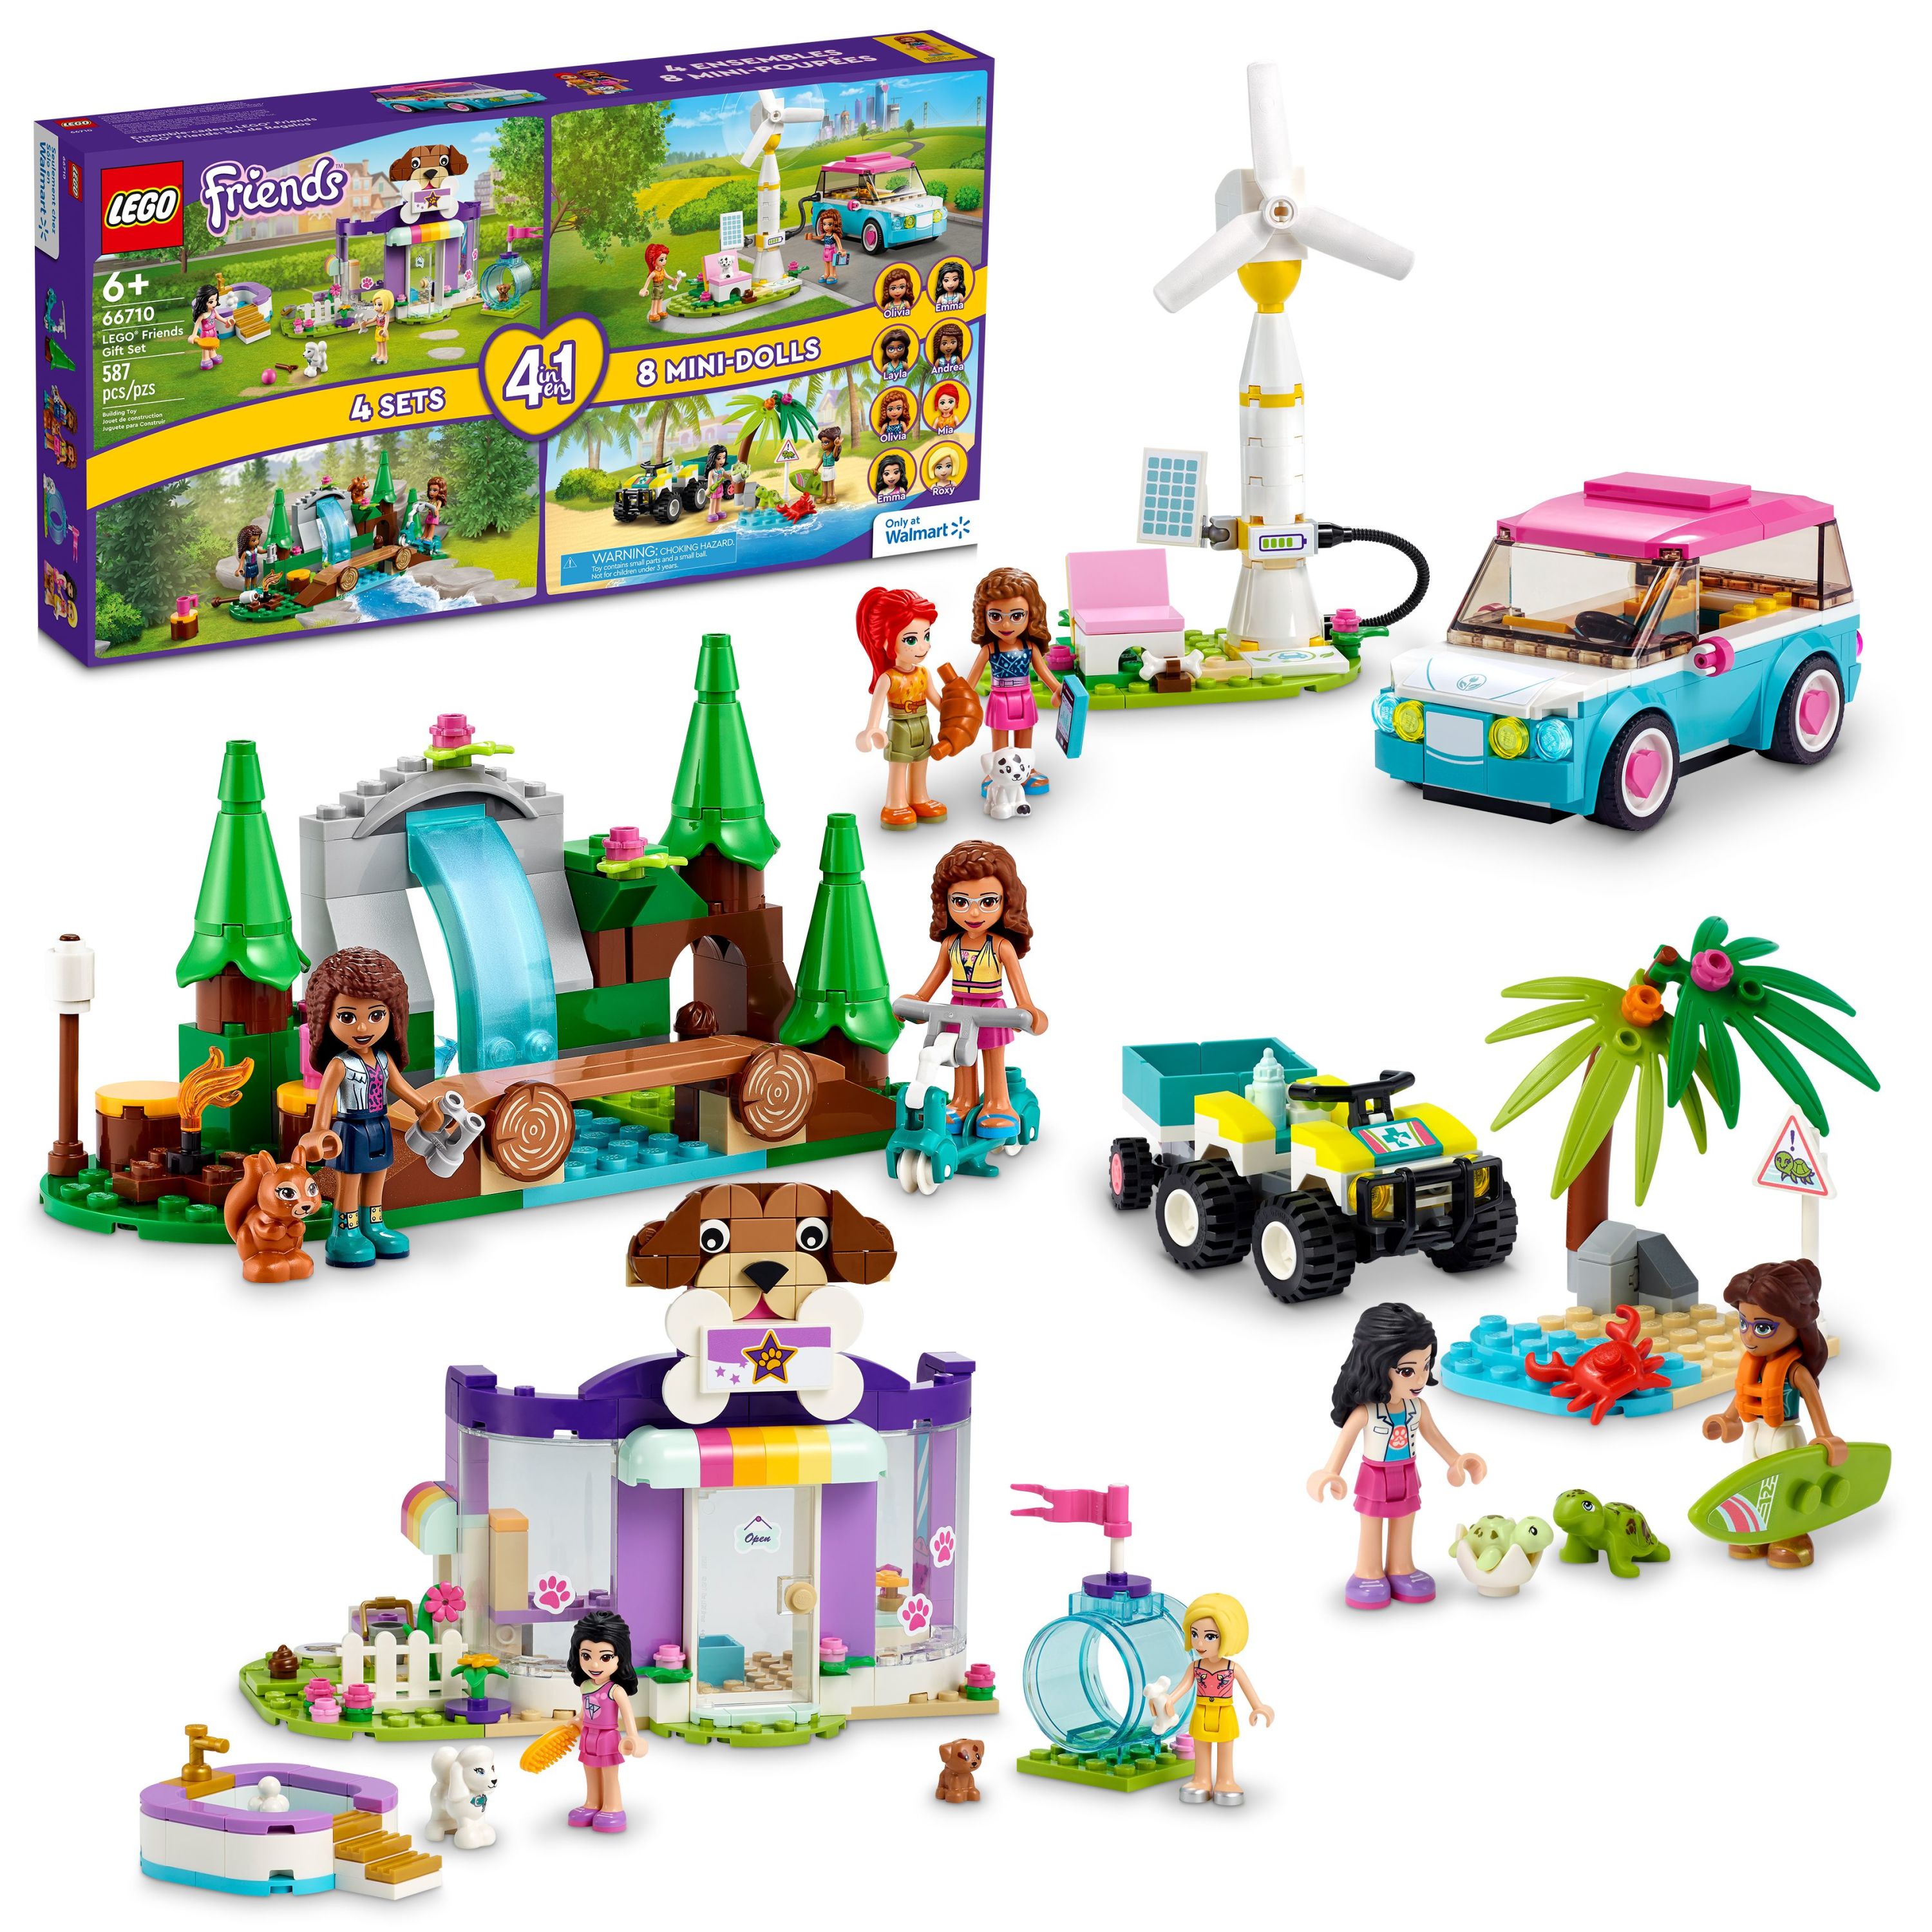 LEGO Friends 66710 4-in-1 Building Toy Gift Set For Kids, Boys, and Girls (587 pieces) - image 1 of 5